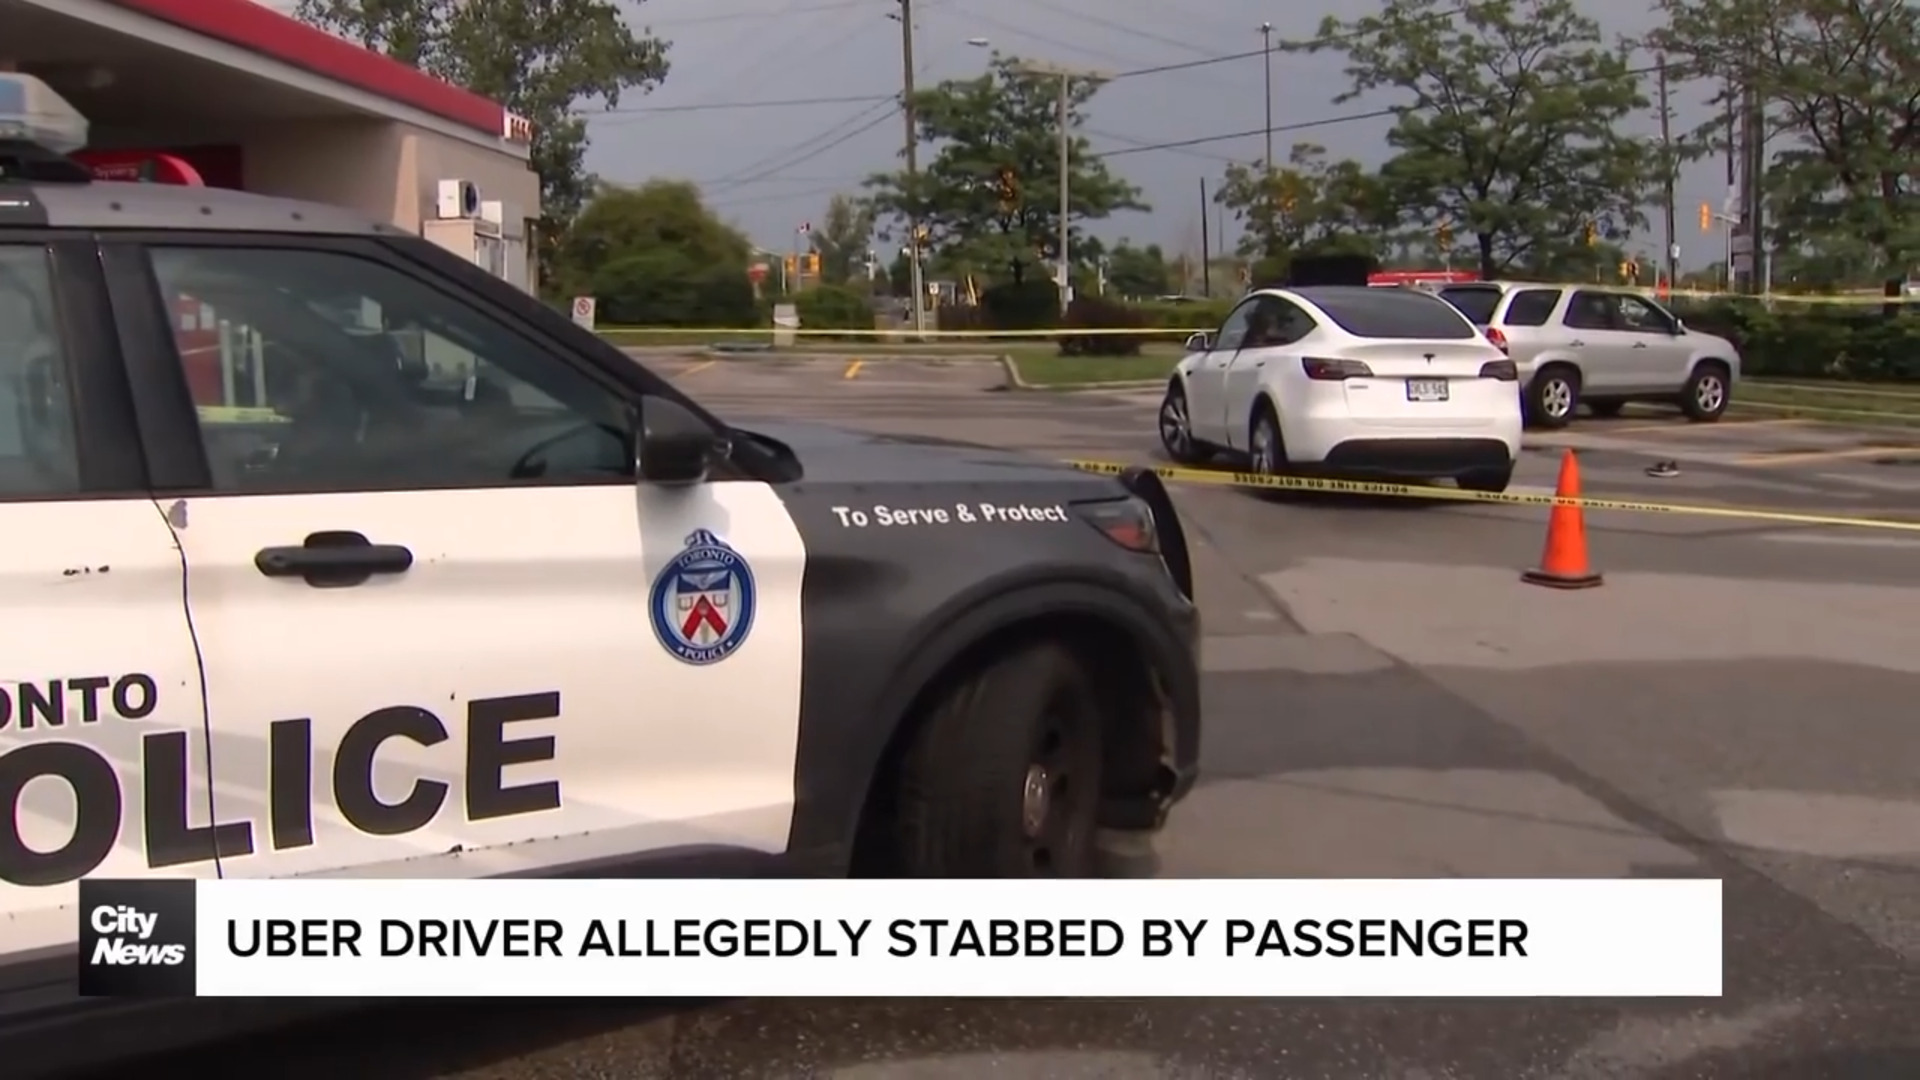 Uber driver allegedly stabbed by passenger